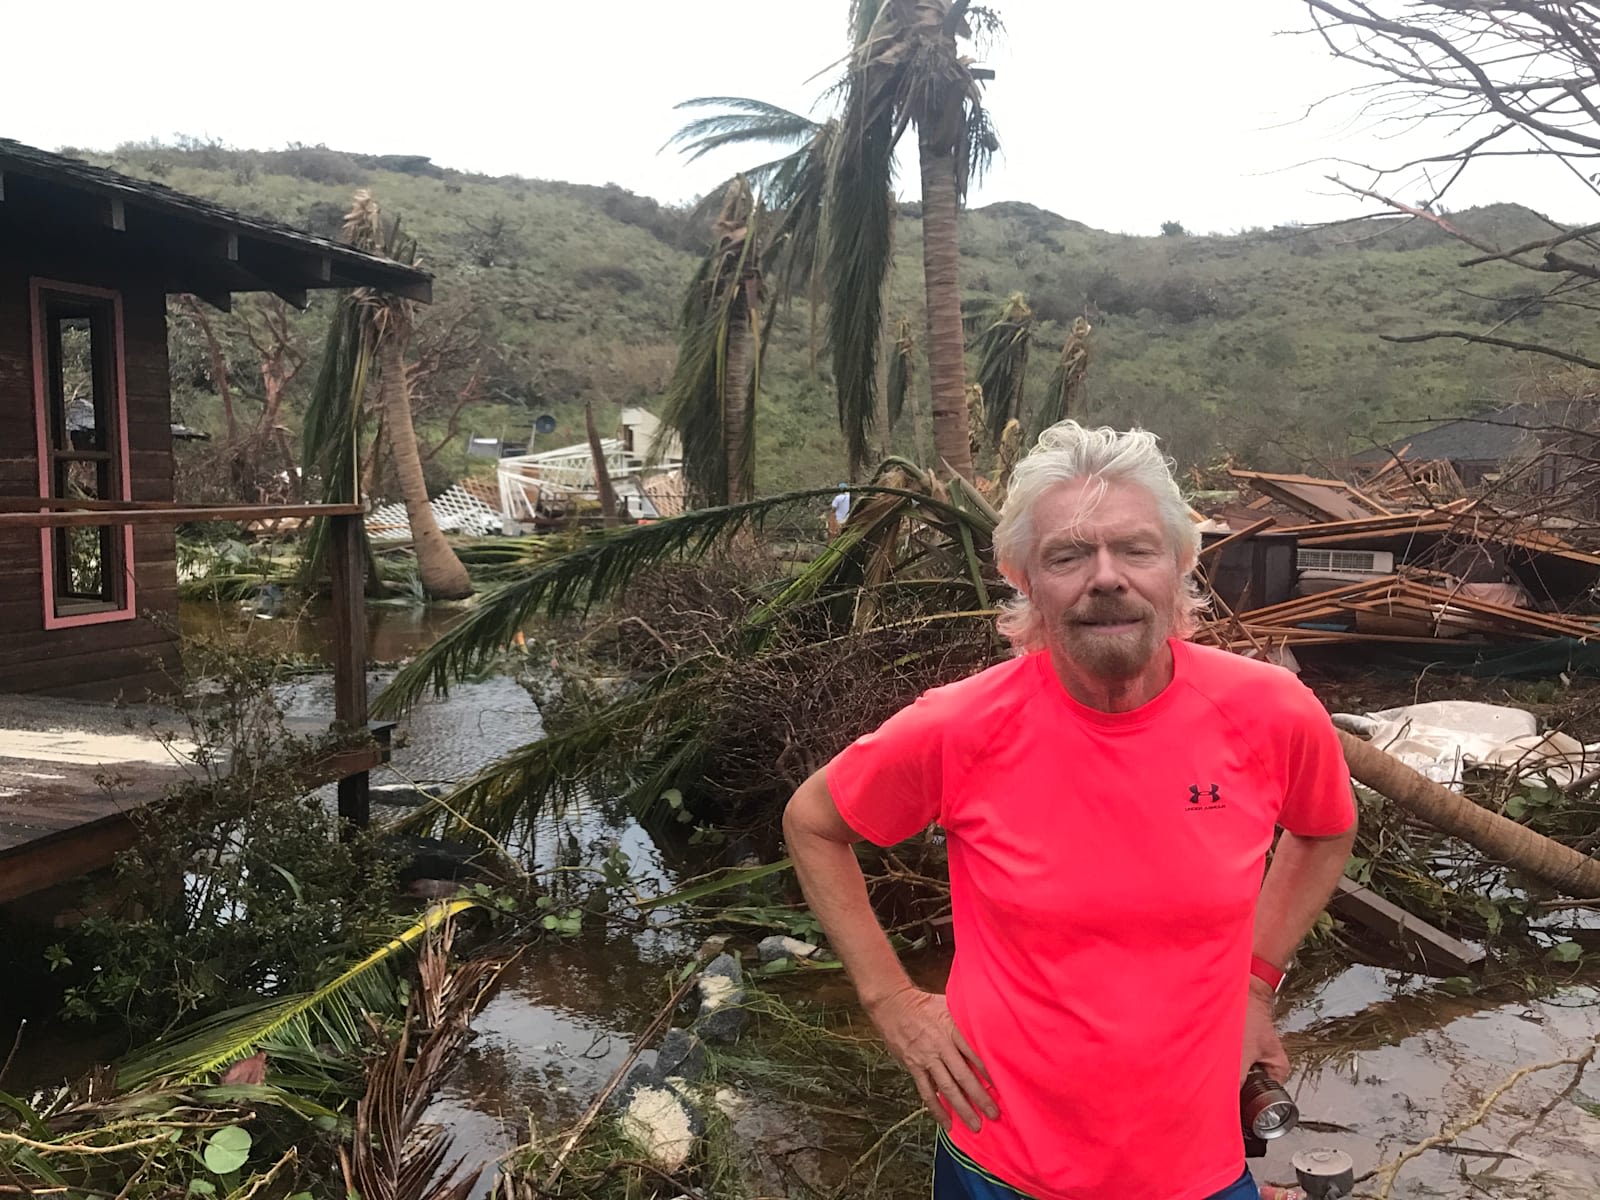 Richard Branson stood in front of damage caused by Hurricane Irma